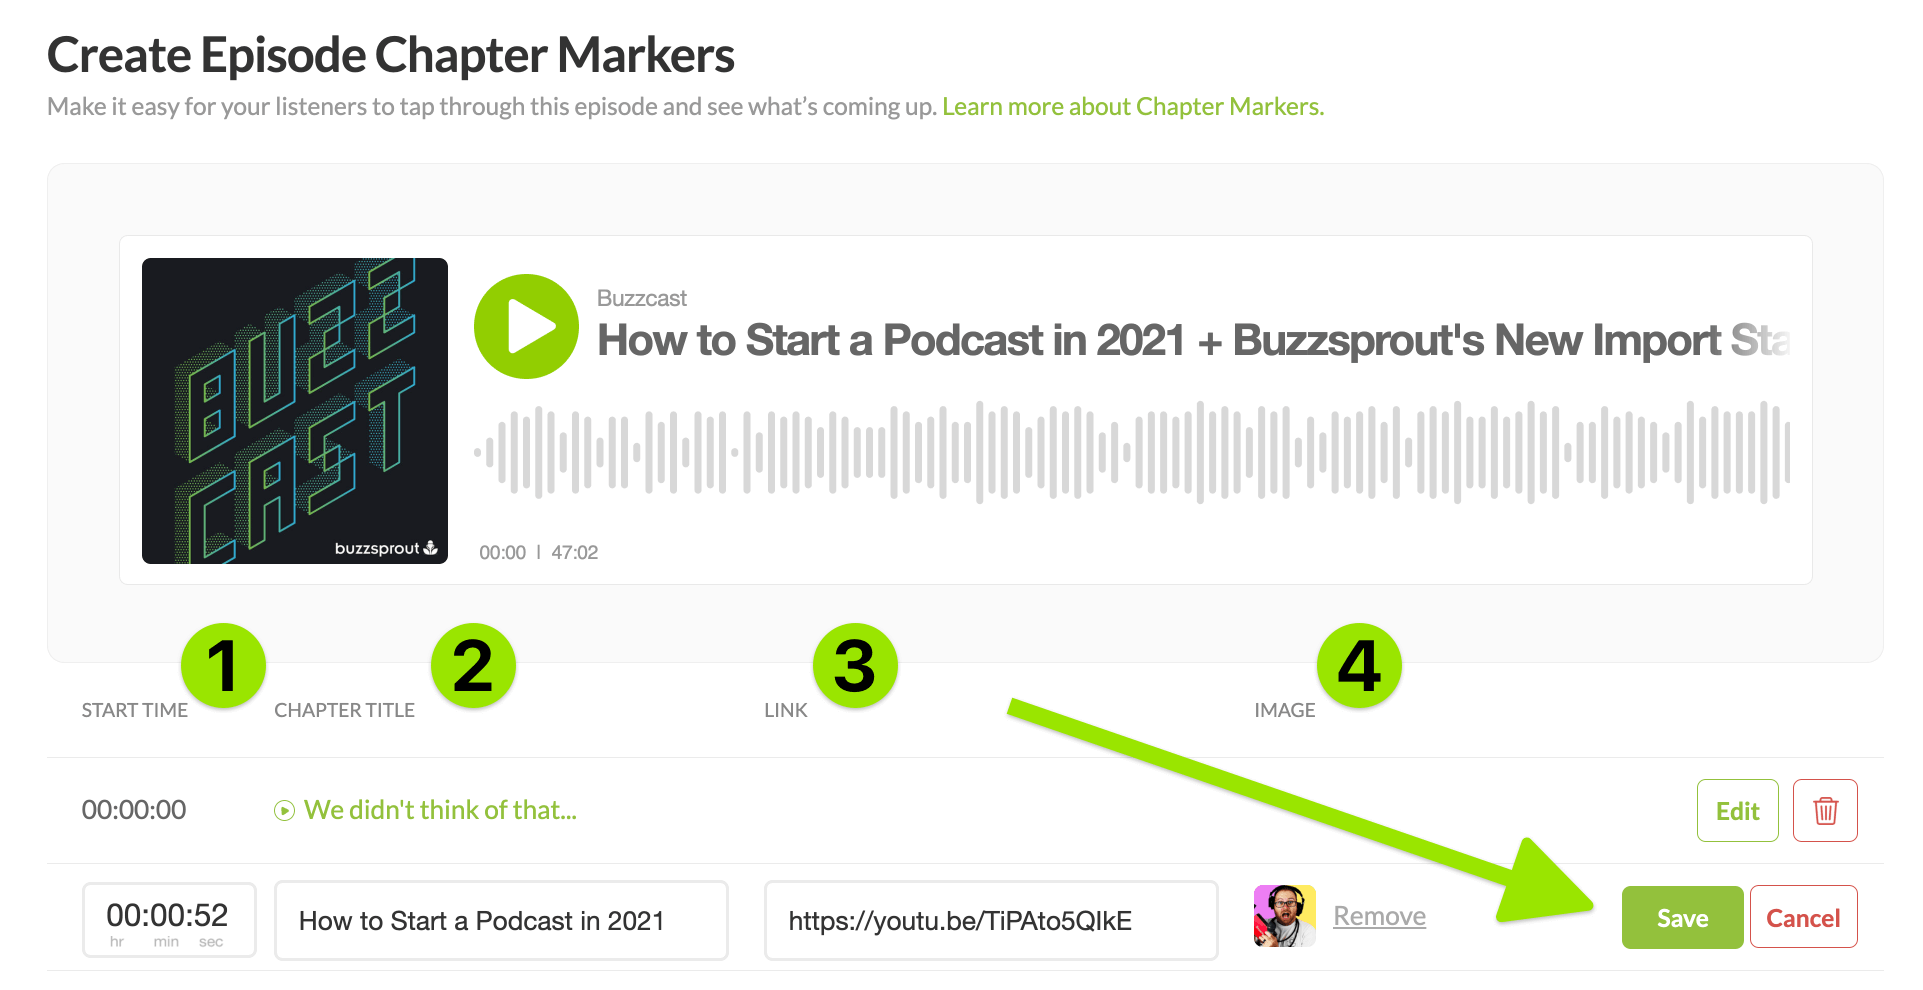 Add Images to Podcast Chapter Markers